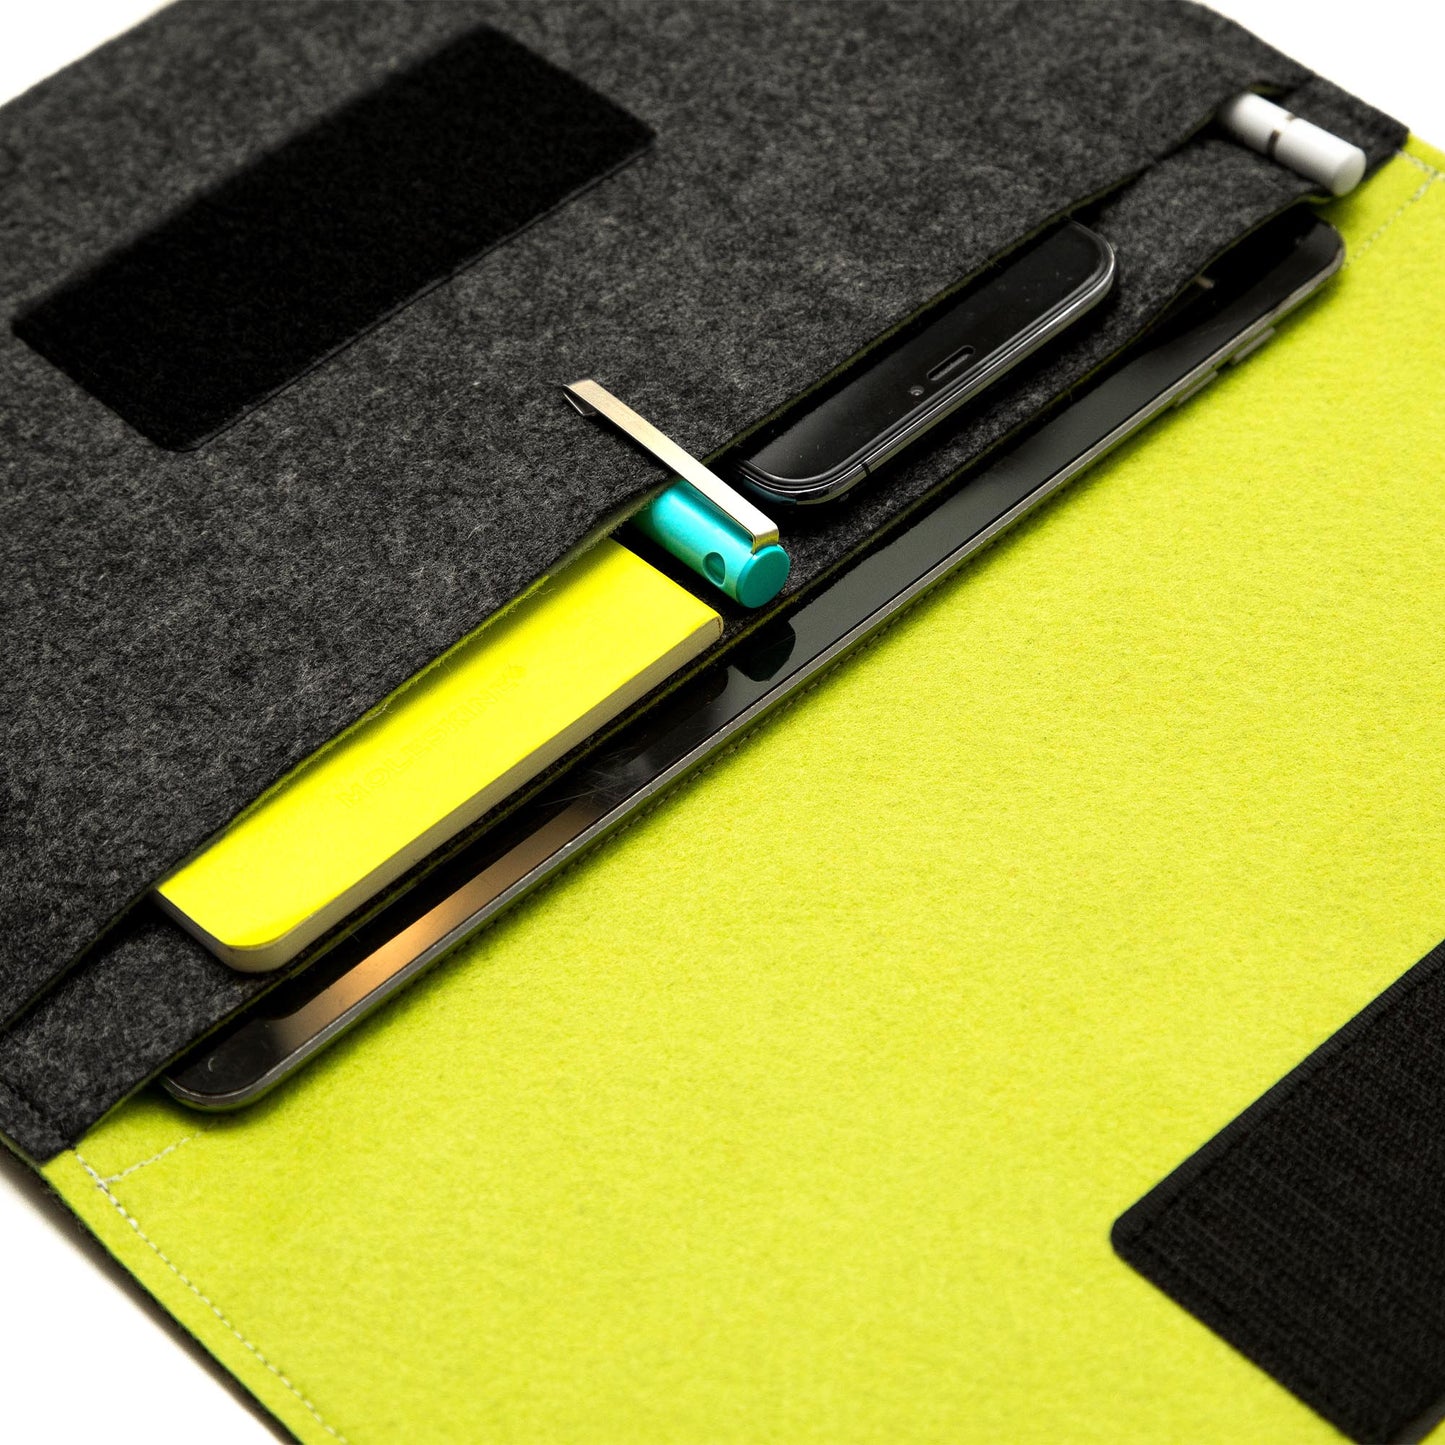 Premium Felt iPad Cover: Ultimate Protection with Accessories Pocket - Charcoal & Lime